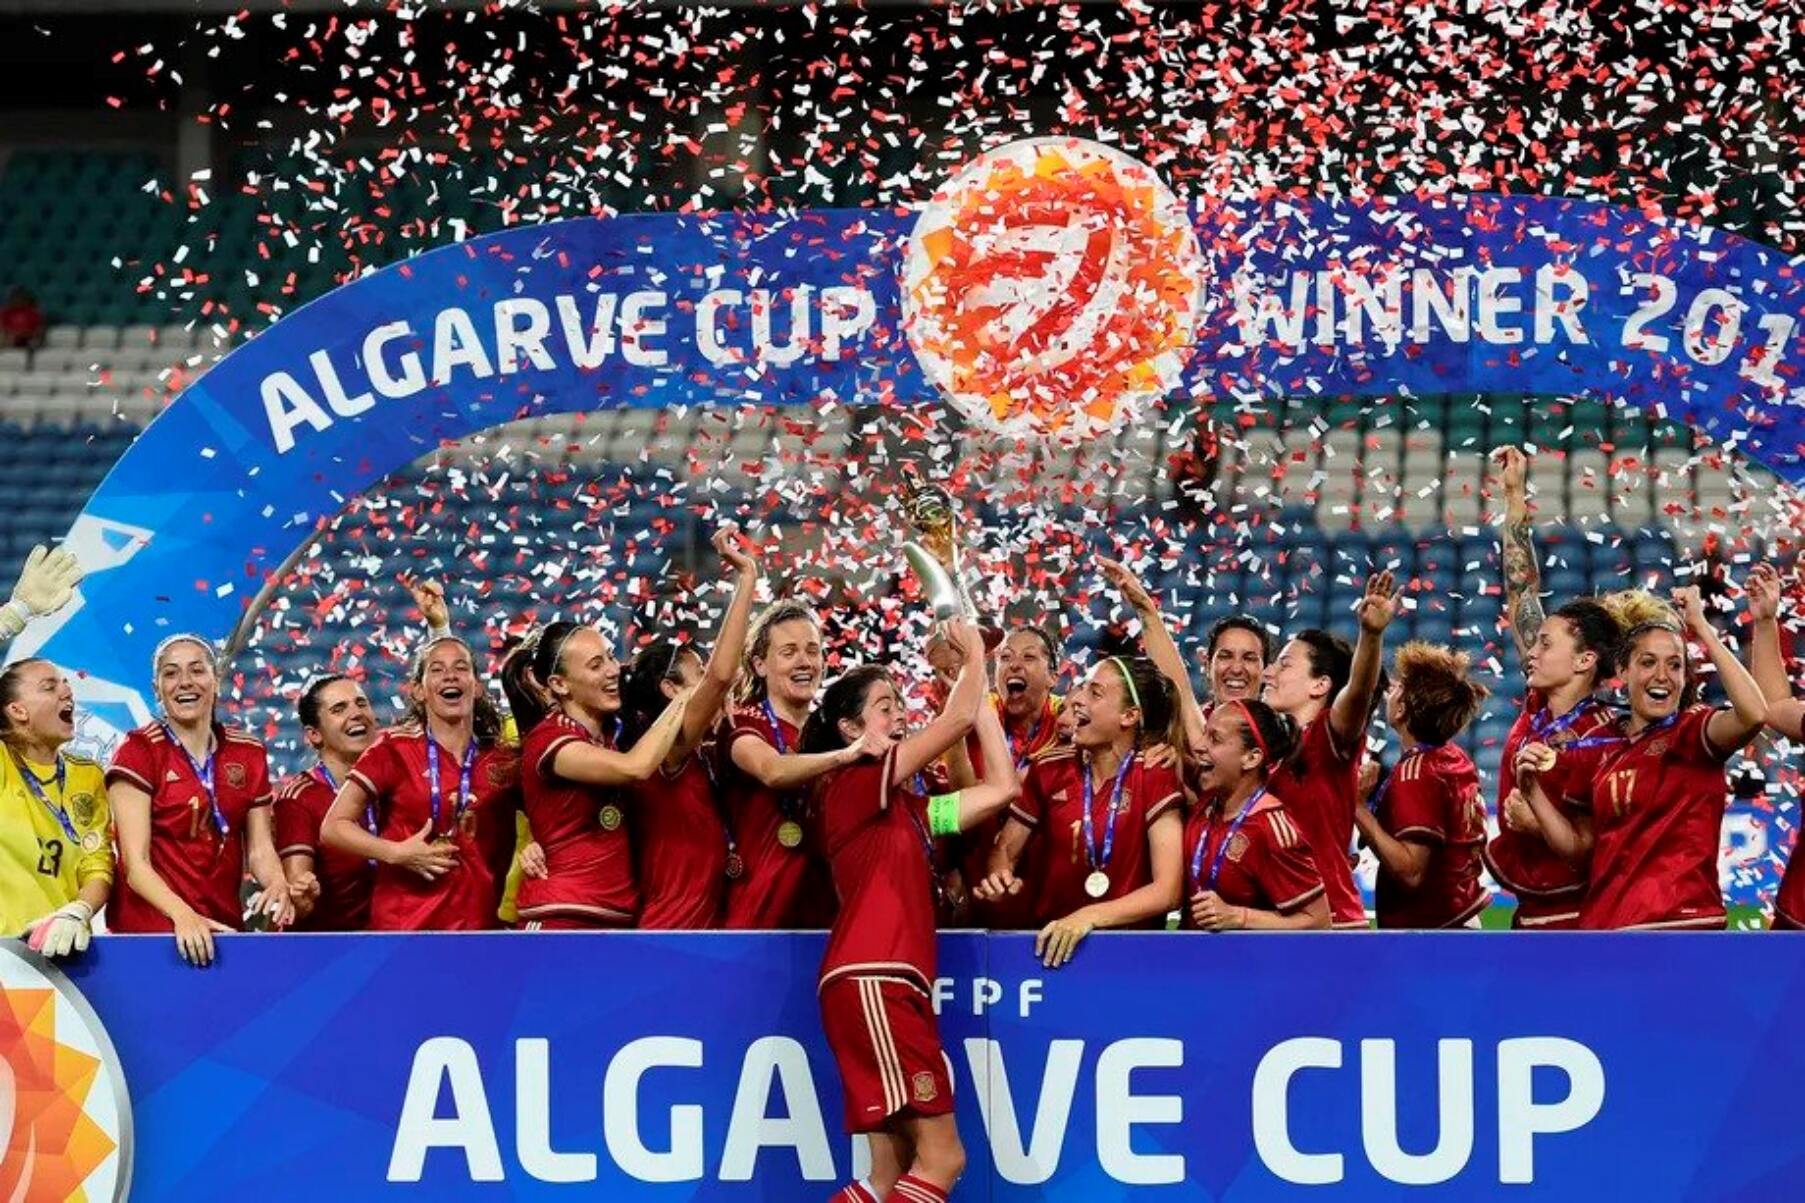 17-facts-about-algarve-cup